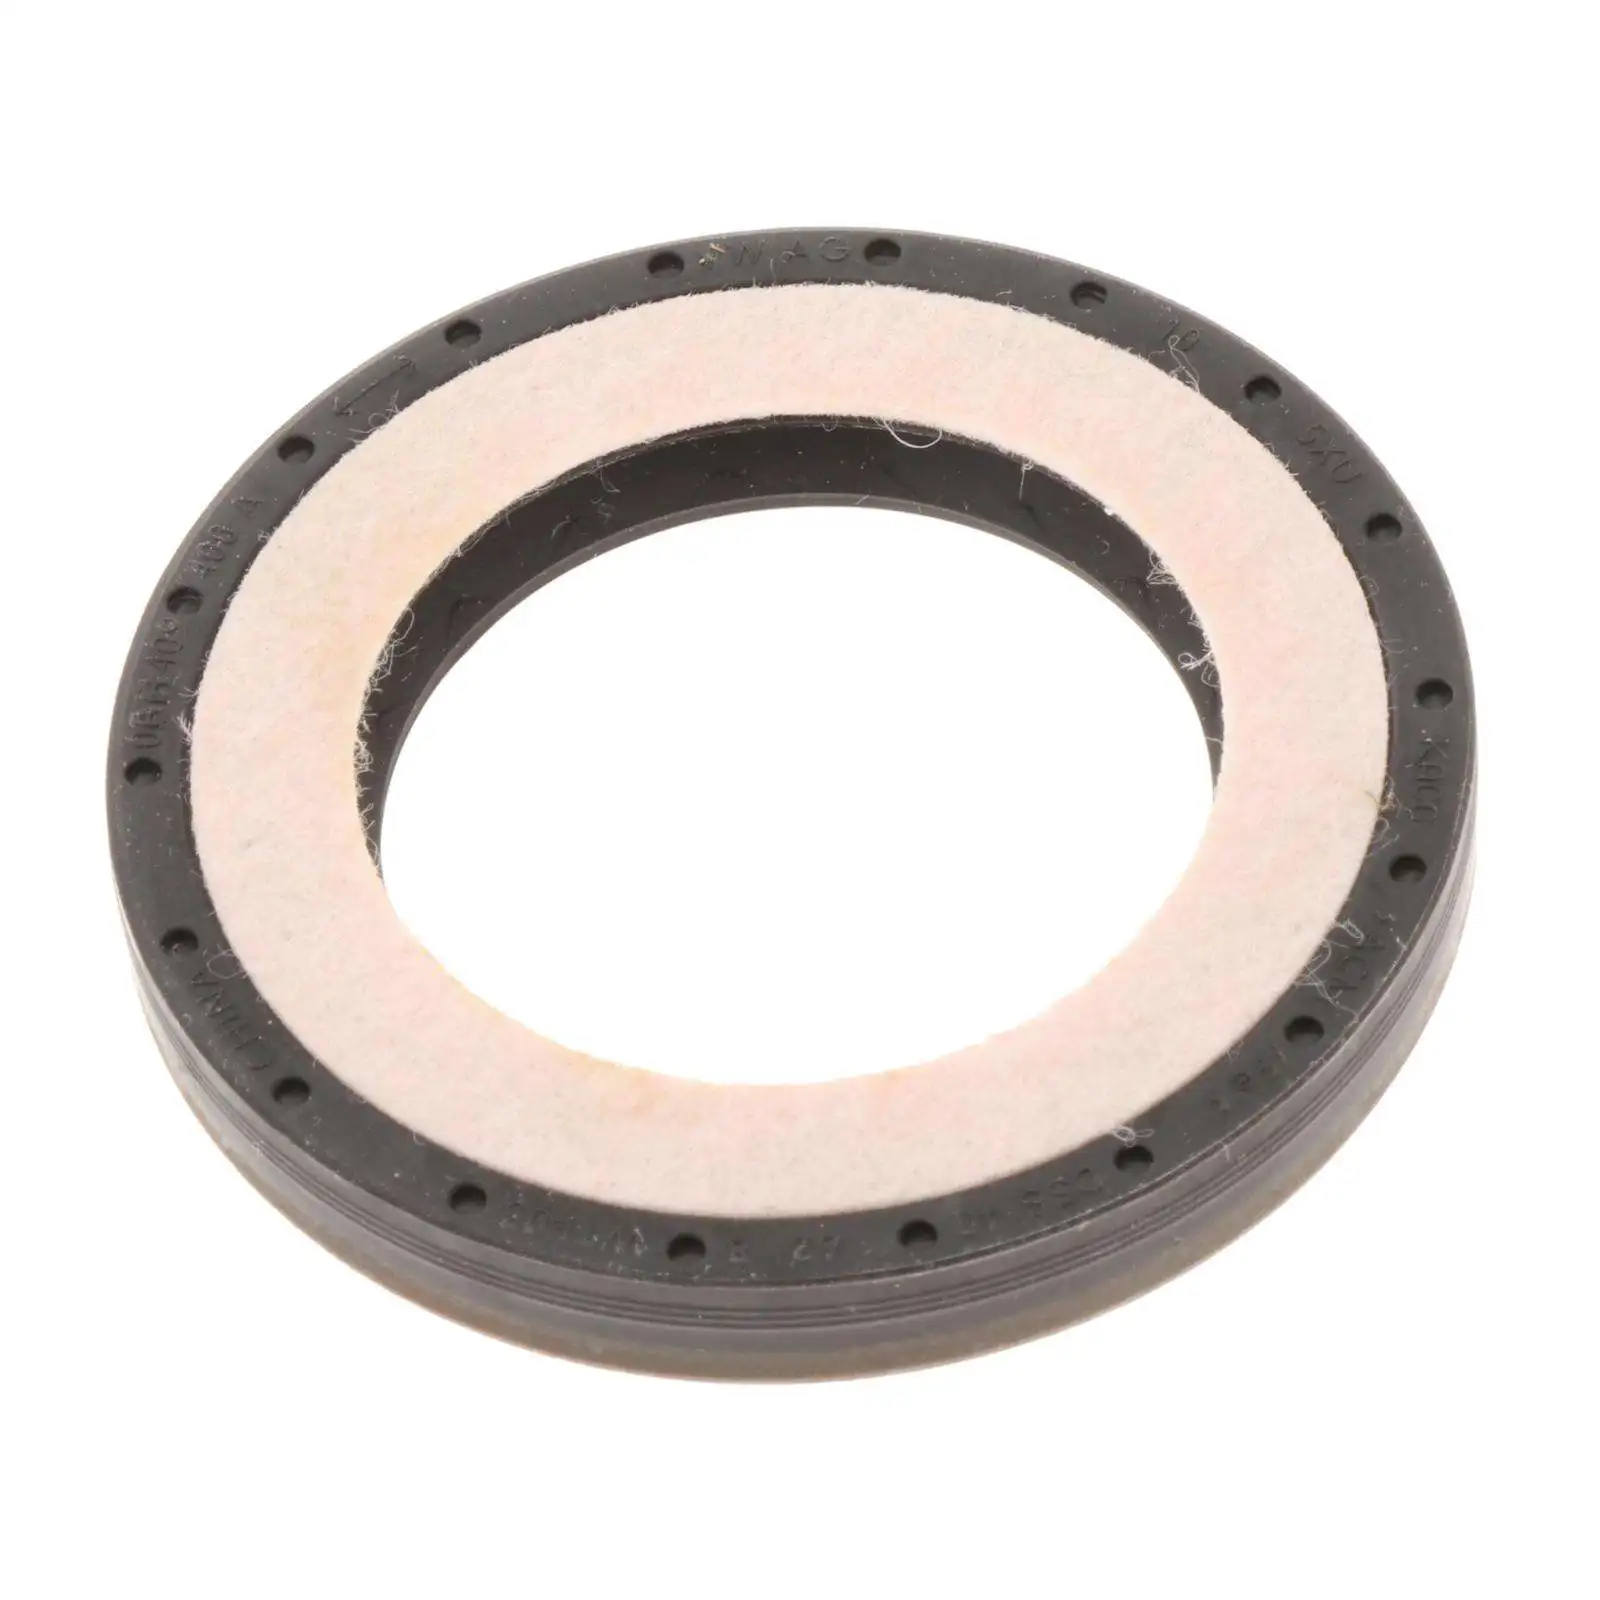 Automatic Transmission Half Shaft Oil Seal for Lingdu Transmission Drivetrain Replacement Accessories for Audi A3 Golf 7